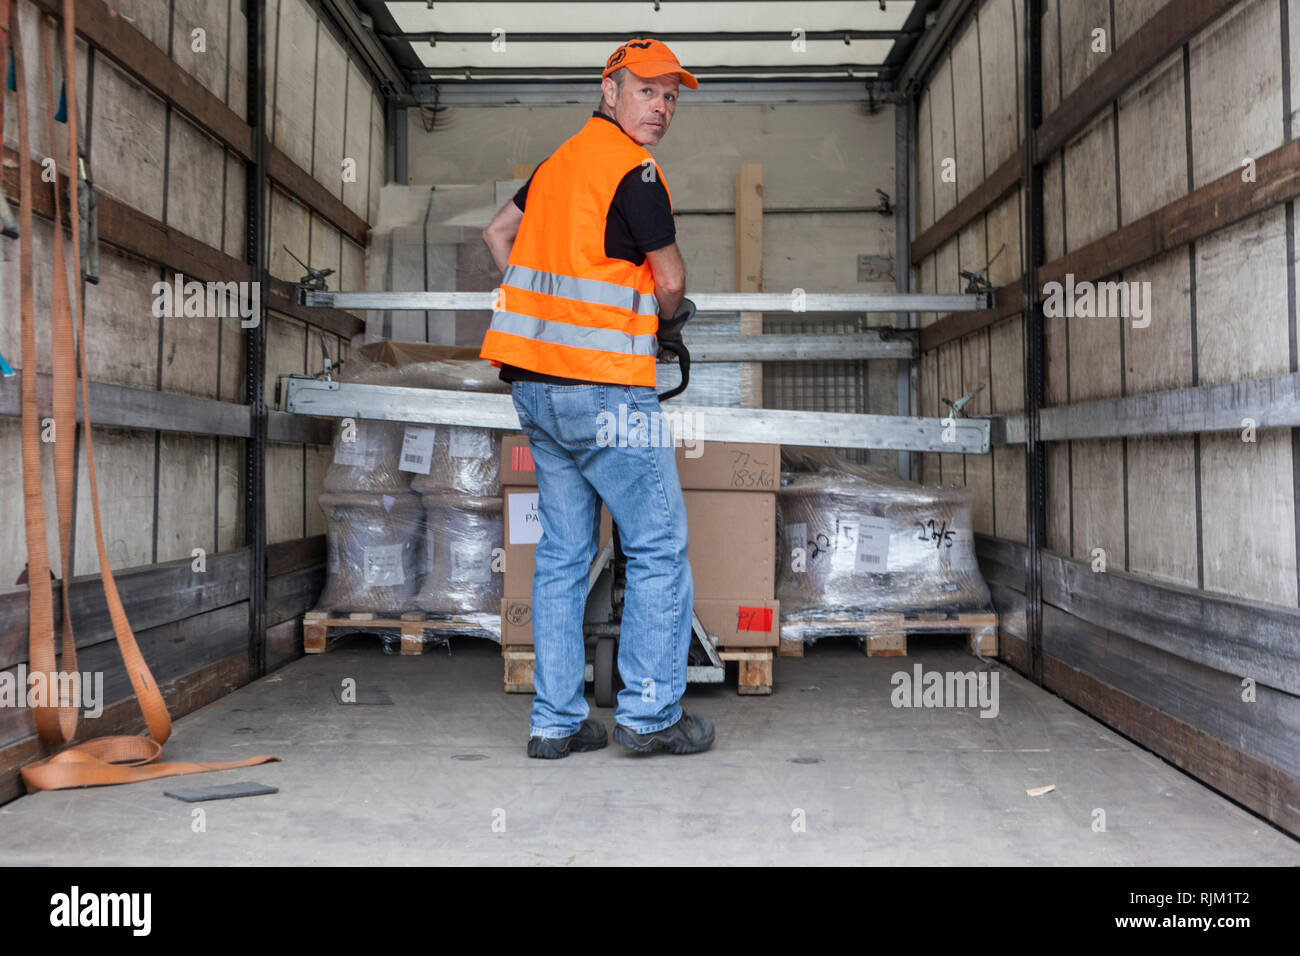 Motorist in load securing Stock Photo